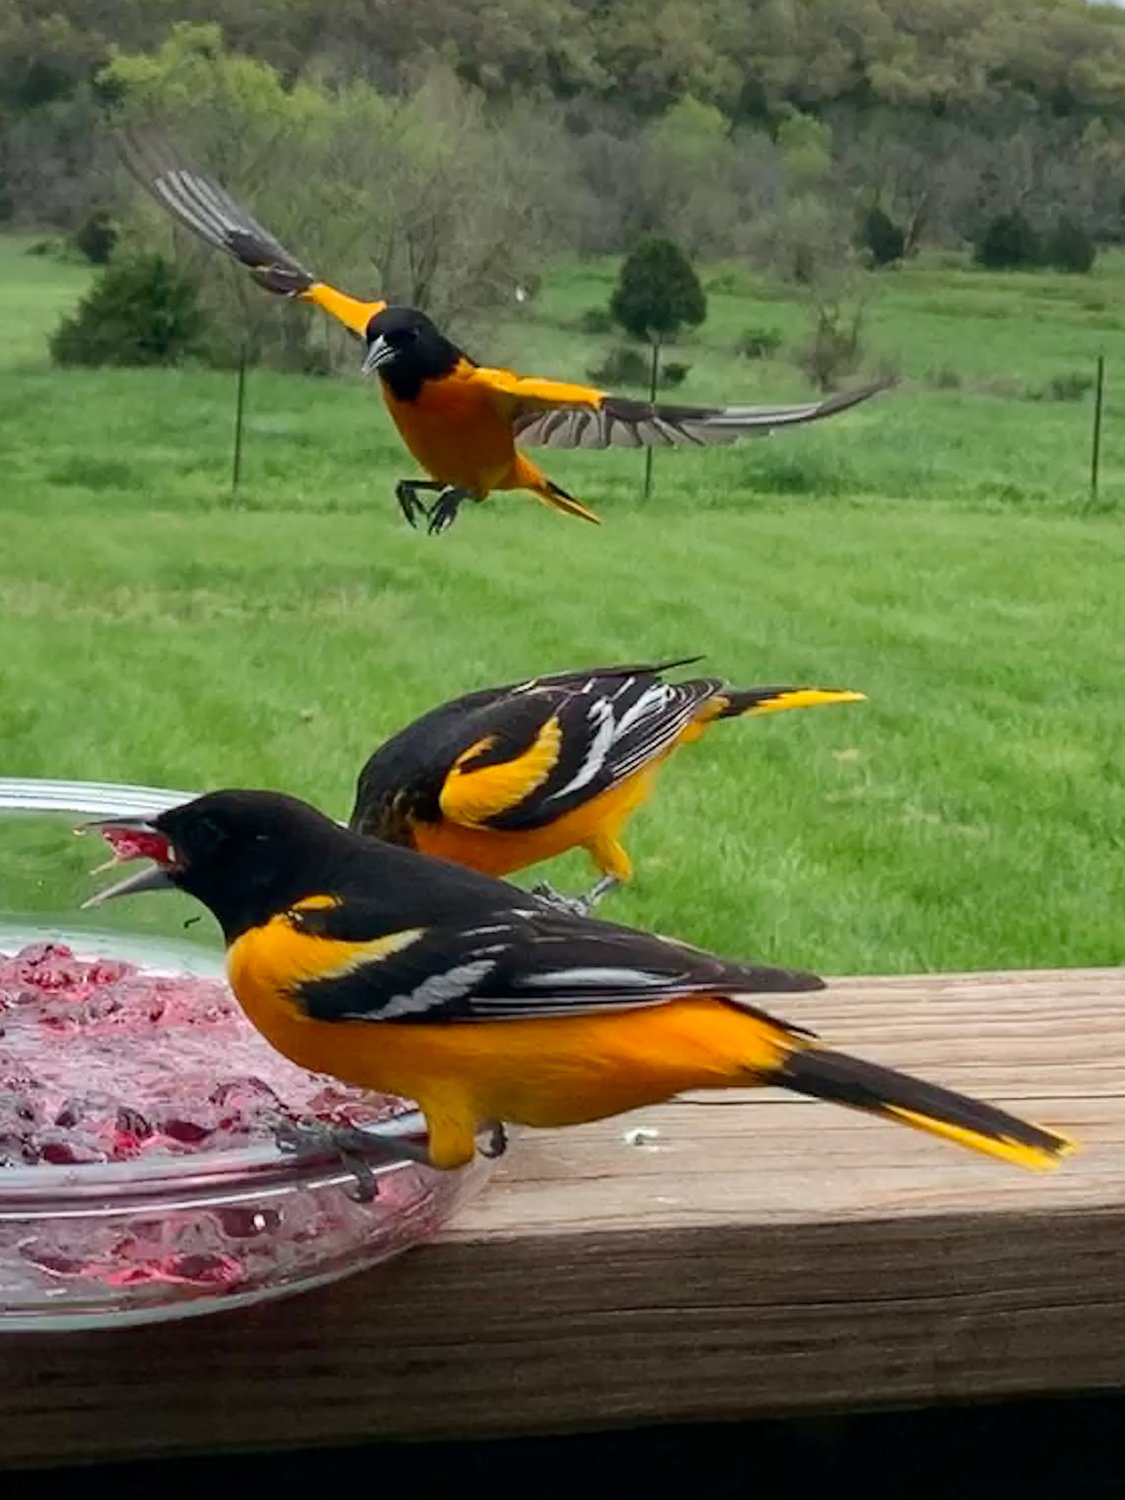 An oriole swooping in to get in on the jelly at the home of Erika Anderson Fields in Niangua, MO.